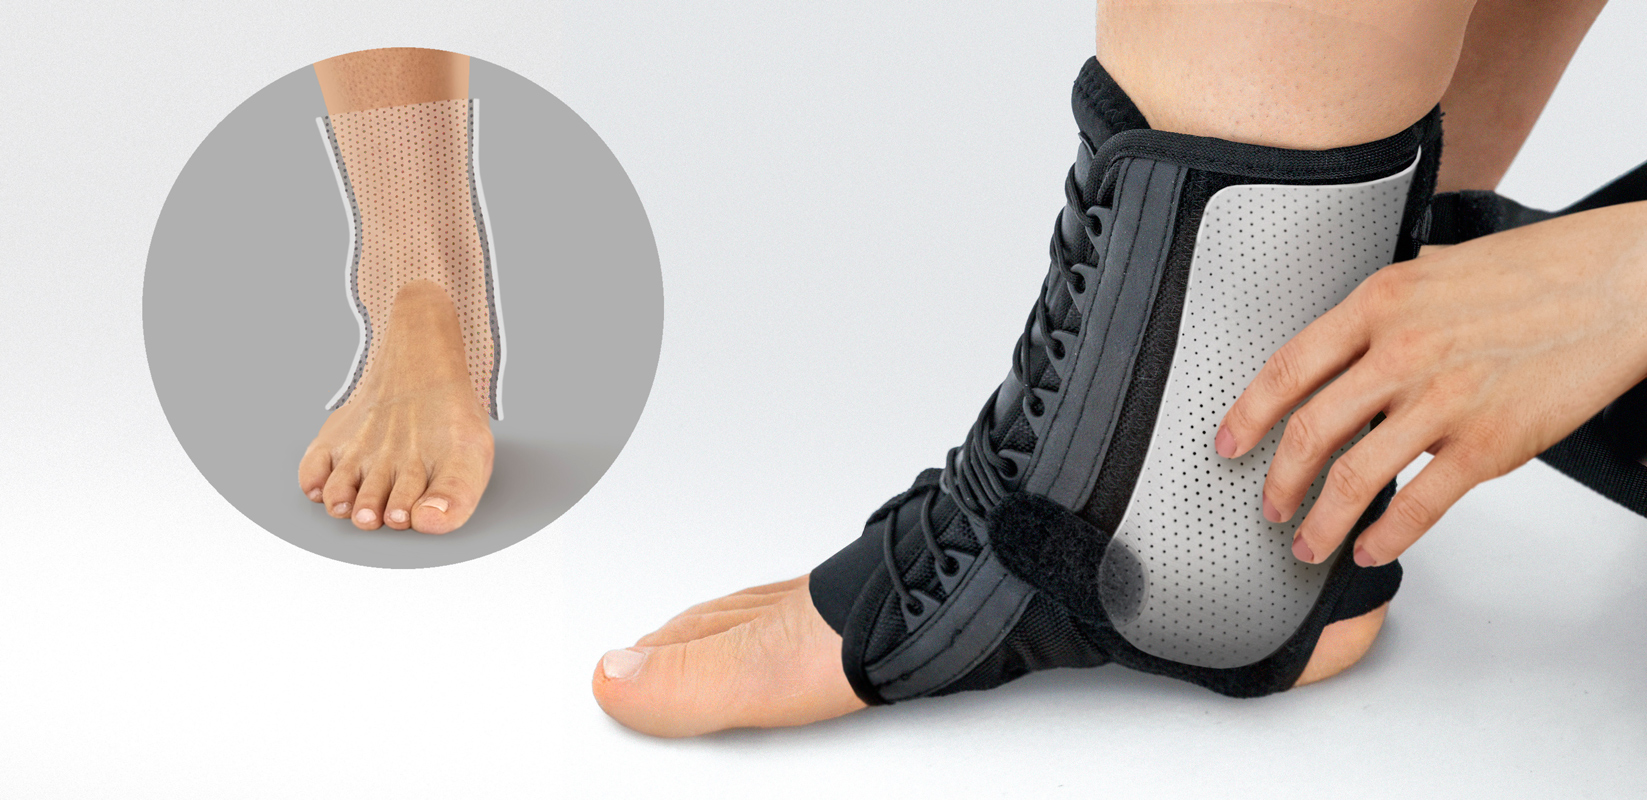 Foot and ankle brace AS-SS  Reh4Mat – lower limb orthosis and braces -  Manufacturer of modern orthopaedic devices